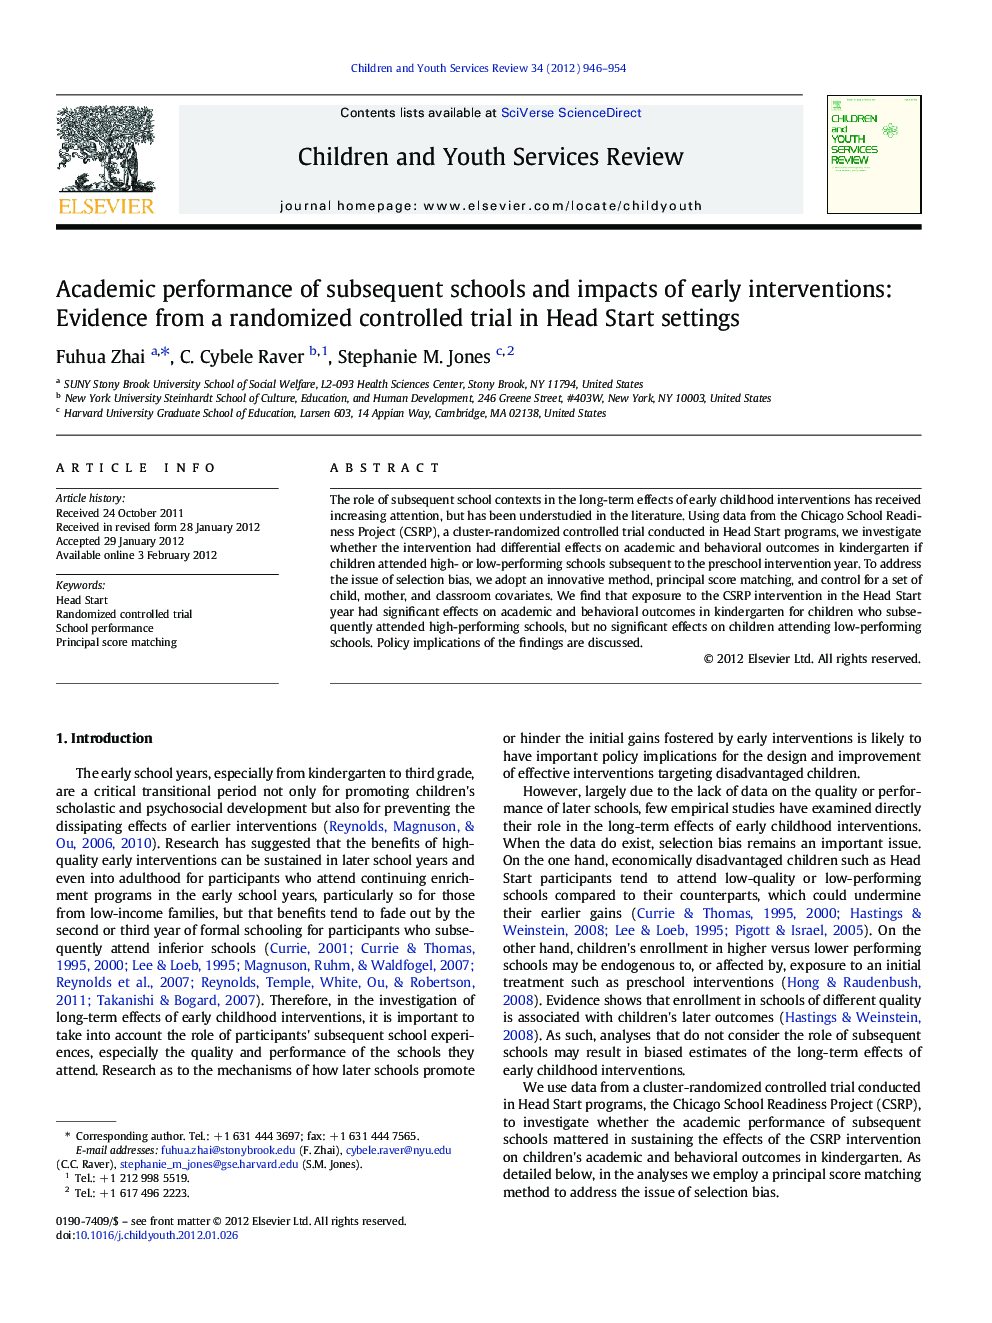 Academic performance of subsequent schools and impacts of early interventions: Evidence from a randomized controlled trial in Head Start settings